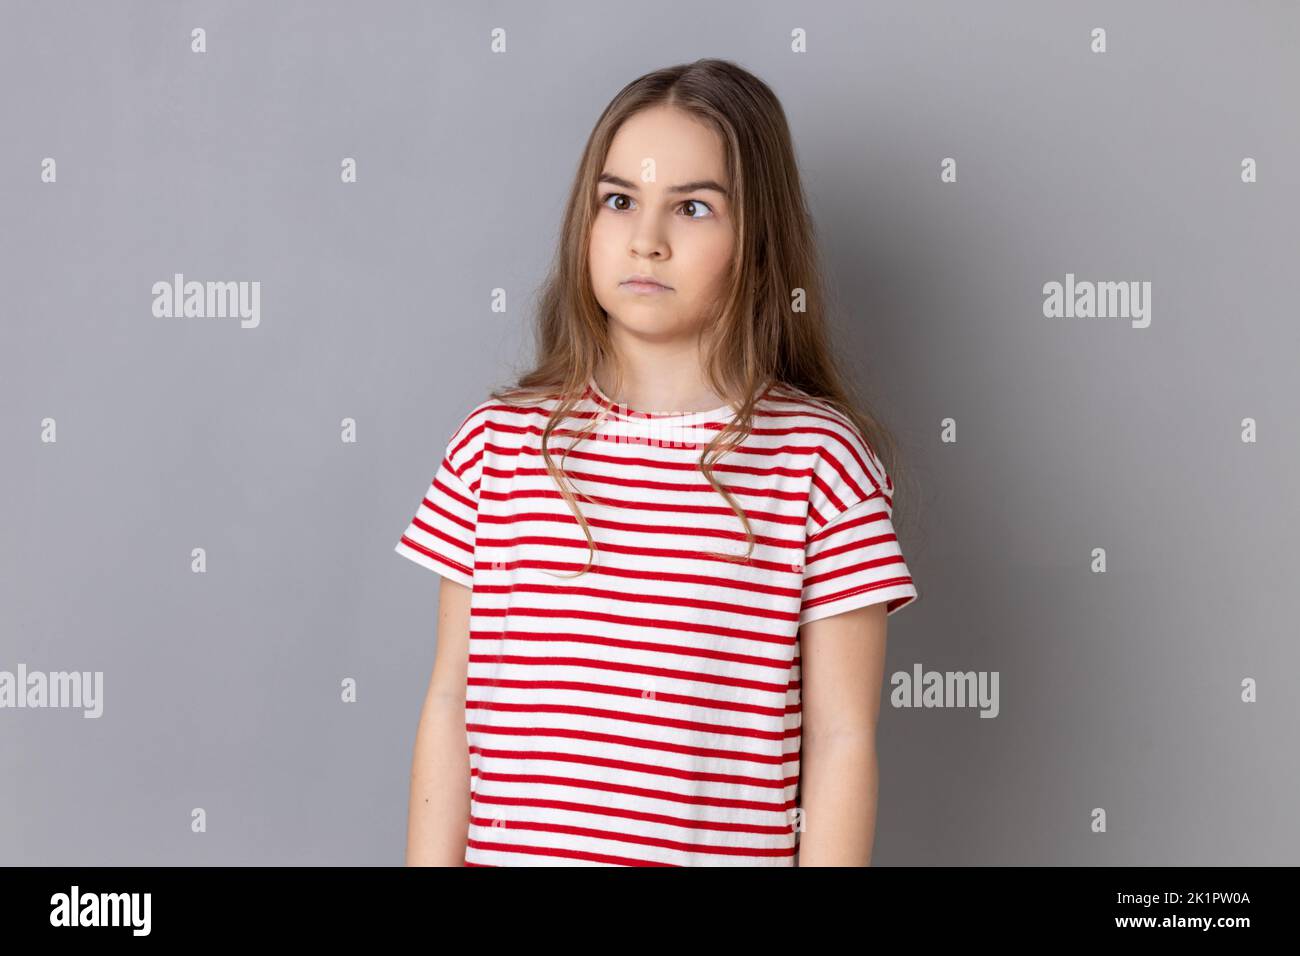 Portrait of funny silly little girl wearing striped T-shirt looking up cross eyed with stupid dumb face, girl has awkward confused comical expression. Indoor studio shot isolated on gray background. Stock Photo